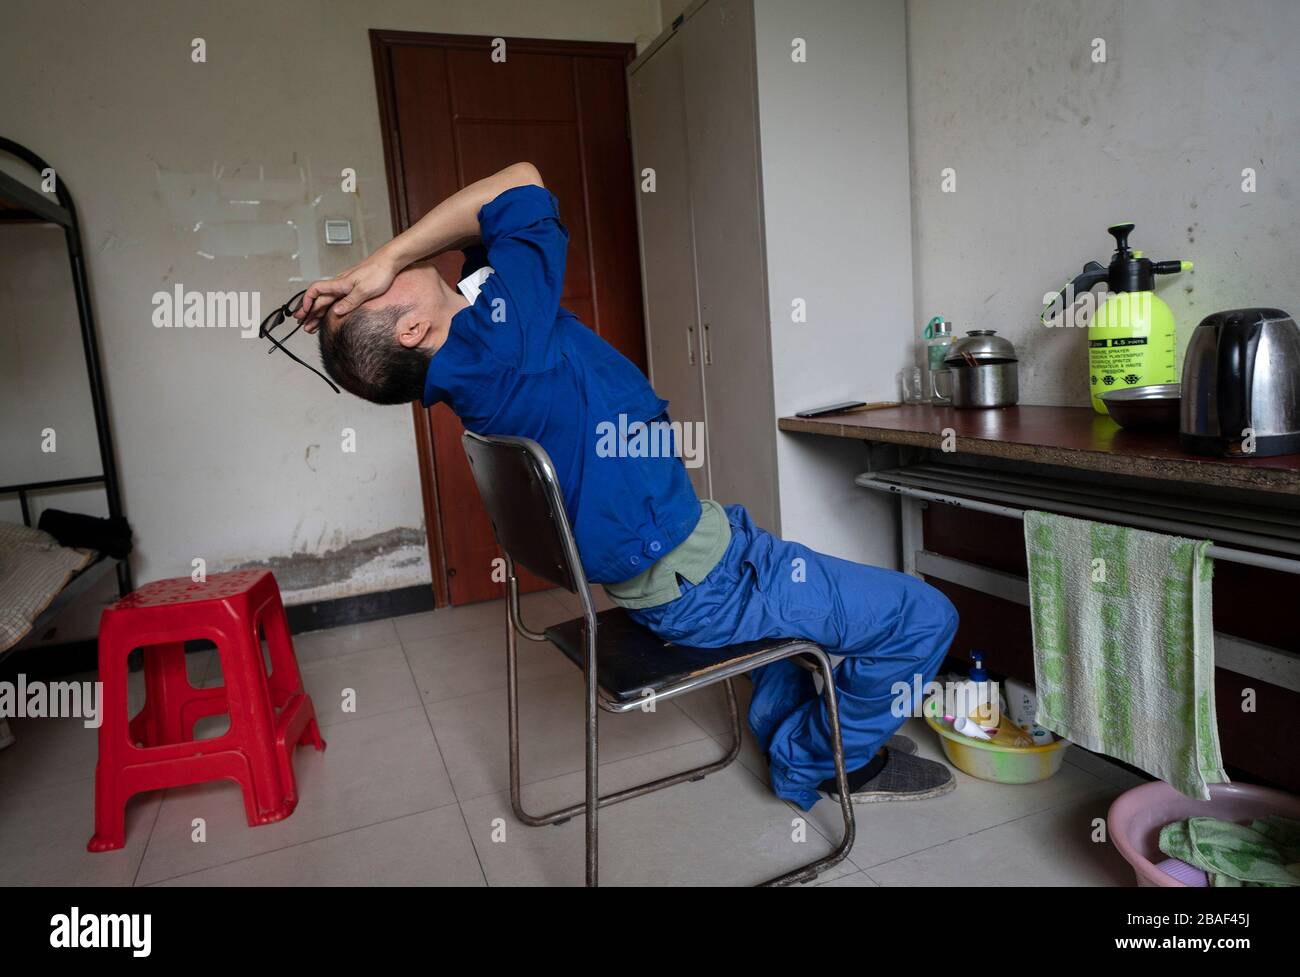 (200327) -- WUHAN, March 27, 2020 (Xinhua) -- Wang Peng stretches himself during lunch break in Wuhan, central China's Hubei Province, March 26, 2020. Wang Peng, 35, has been working for the Wuhan Hanshi Environmental Engineering Company for 9 years, where he is responsible for the disposal and incineration of medical waste.Protection against infection is a major challenge that Wang and his coworkers face, as they work 12-hour shifts to cope with the surging workload during the COVID-19 outbreak. 'I like what I'm doing,' Wang said, 'I'm not only making money for my family, but also making a co Stock Photo